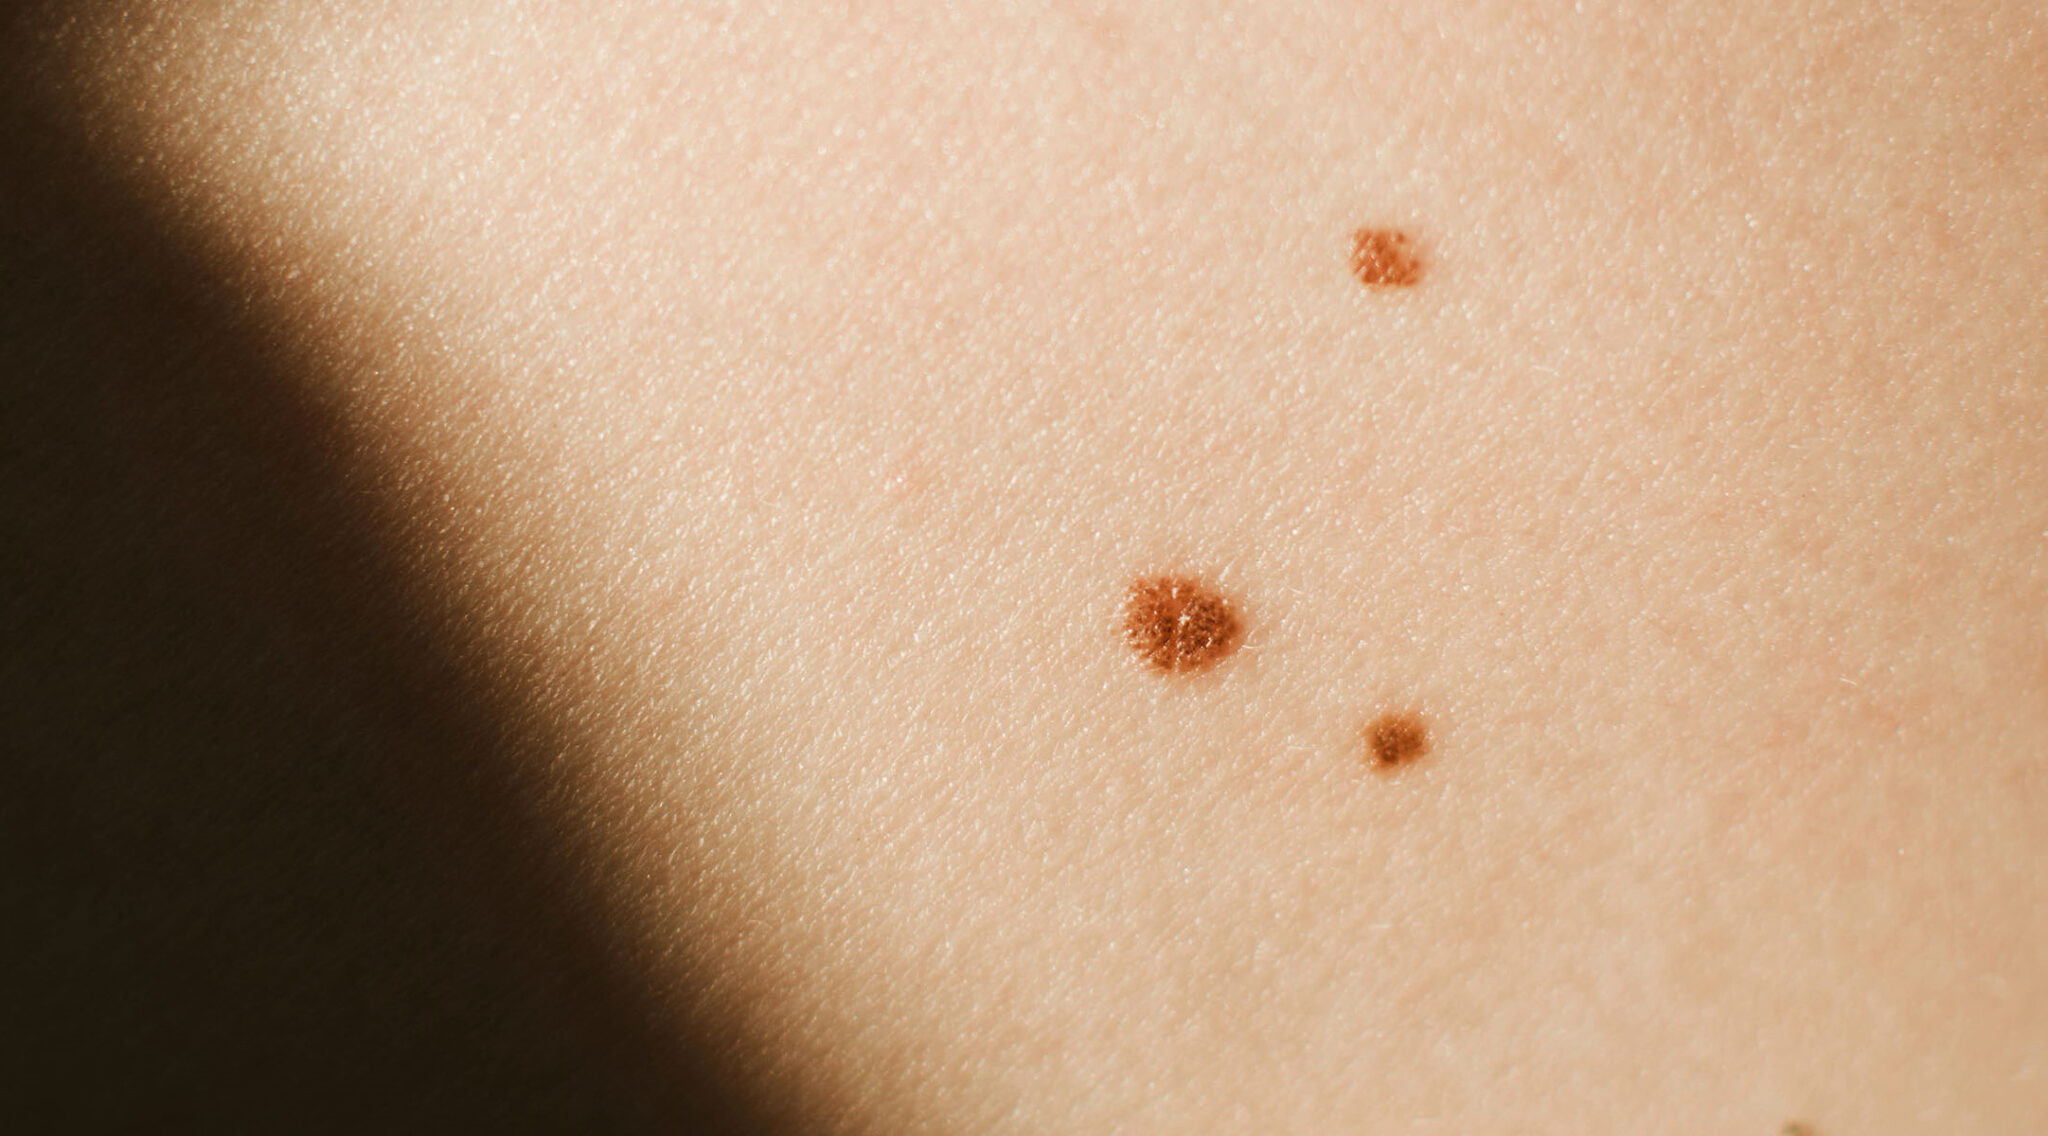 How Does A Cancerous Mole Look Like Symptoms And Pictures